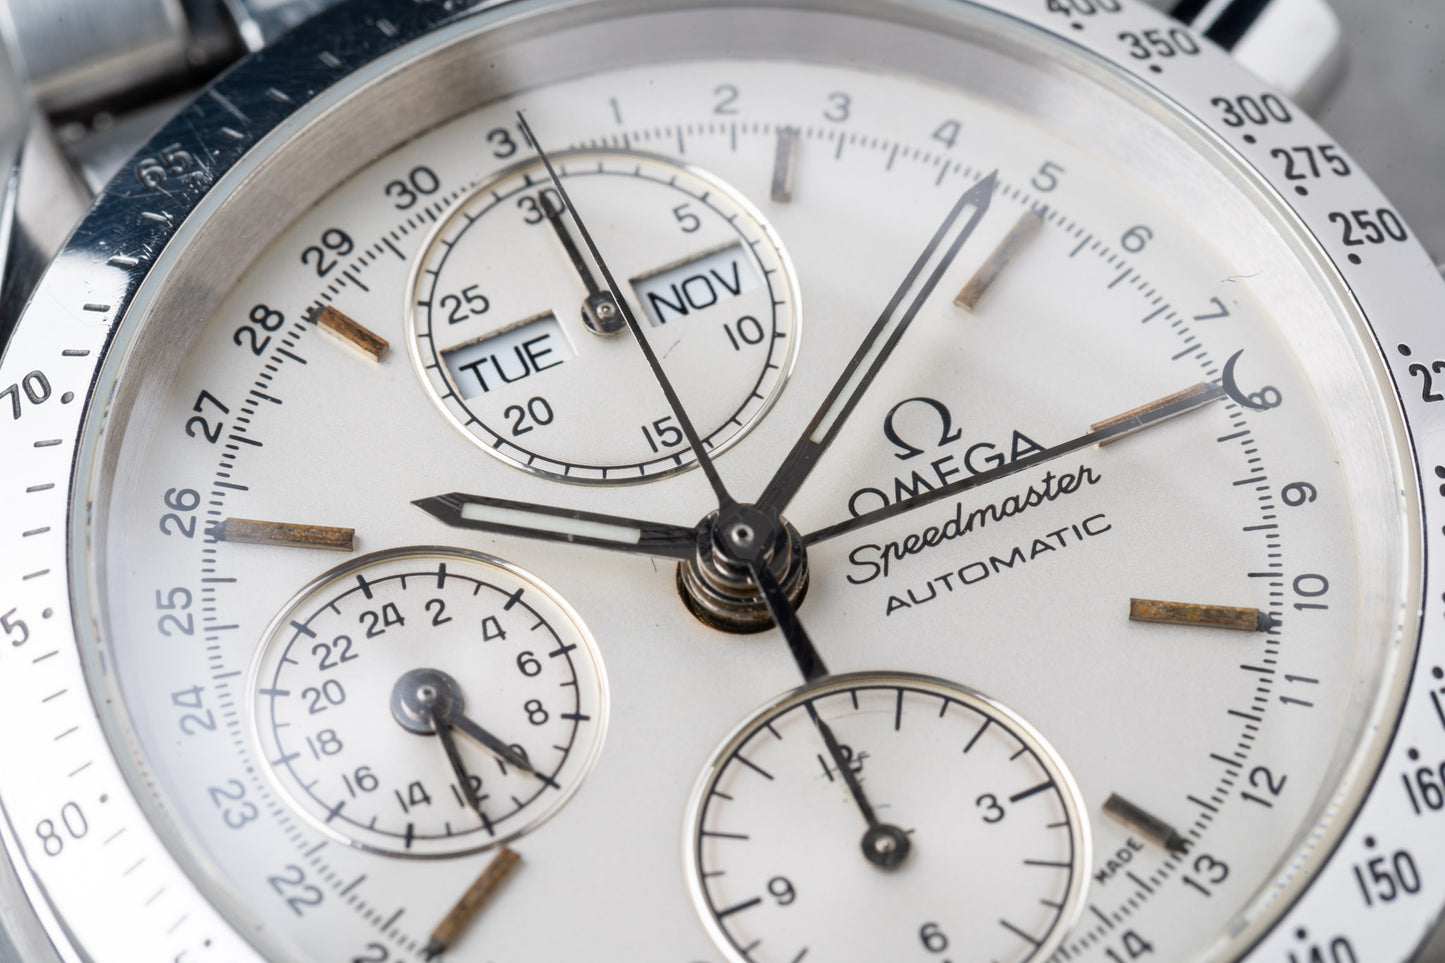 1995 Omega Speedmaster Reduced Automatic Triple Date Chronograph